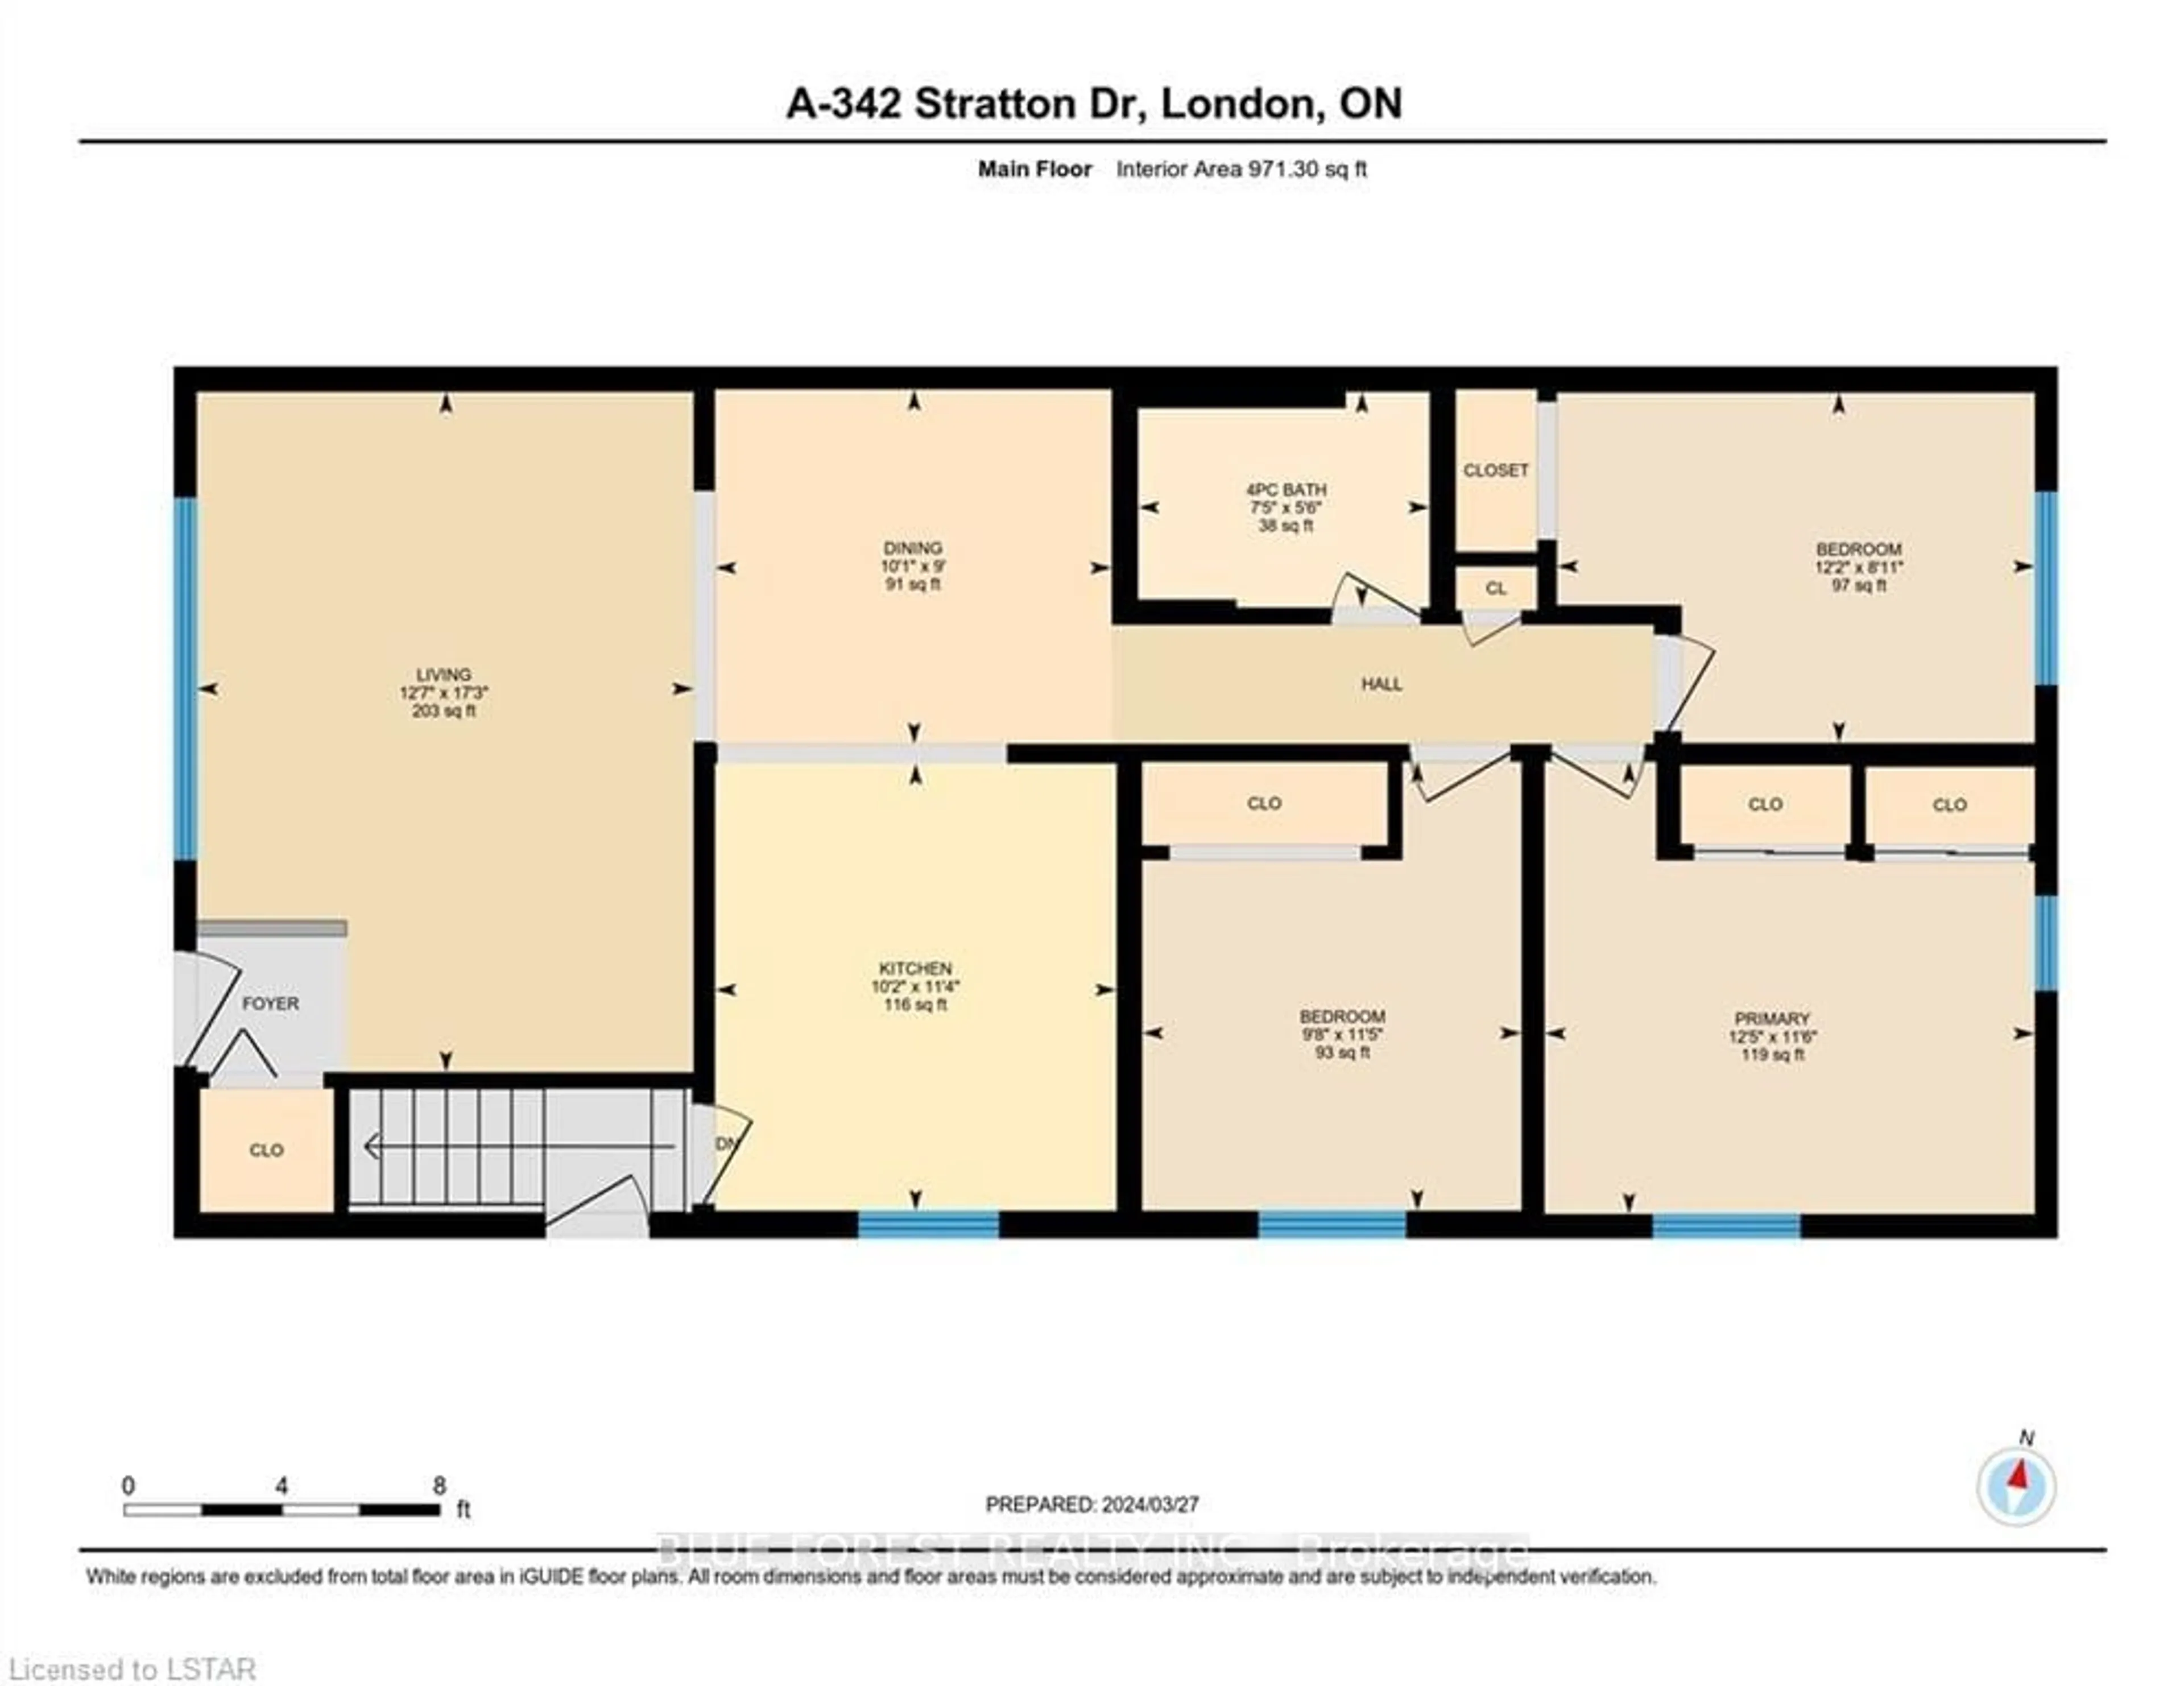 Floor plan for 342A Stratton Dr, London Ontario N5W 4Z7